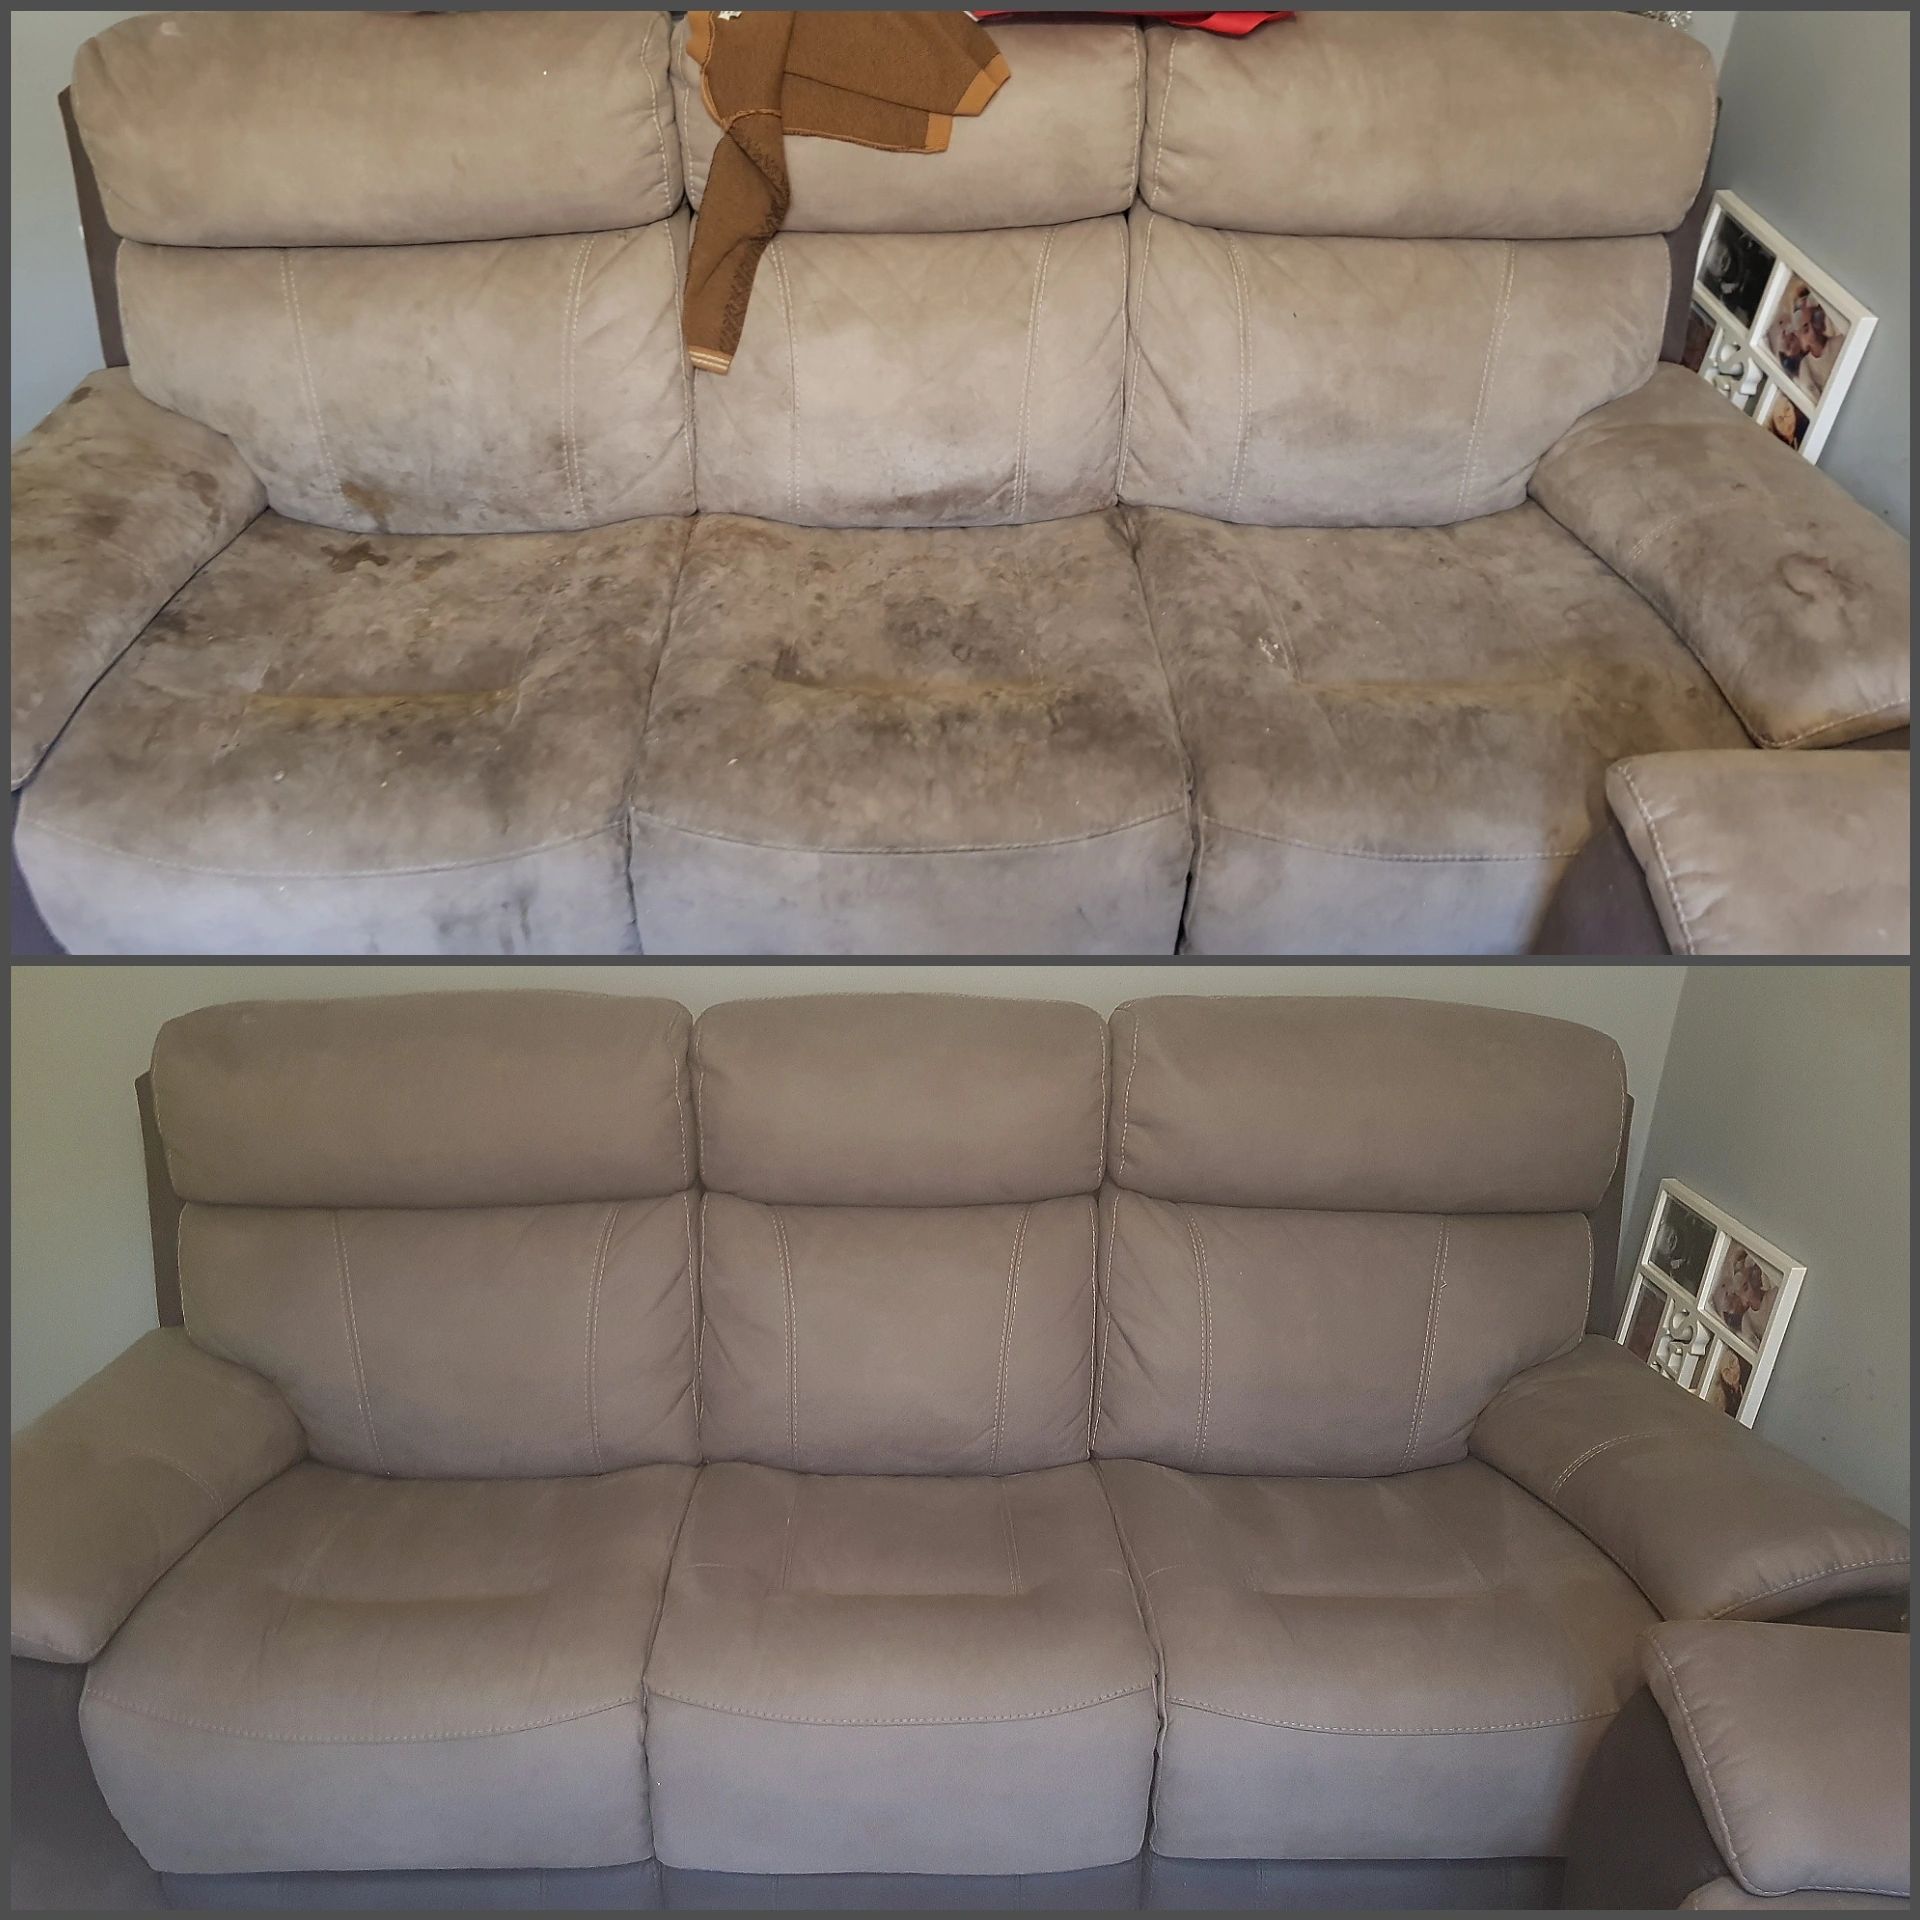 Suede sofa being professionally cleaned at carpetmonsters carpet cleaners leeds 